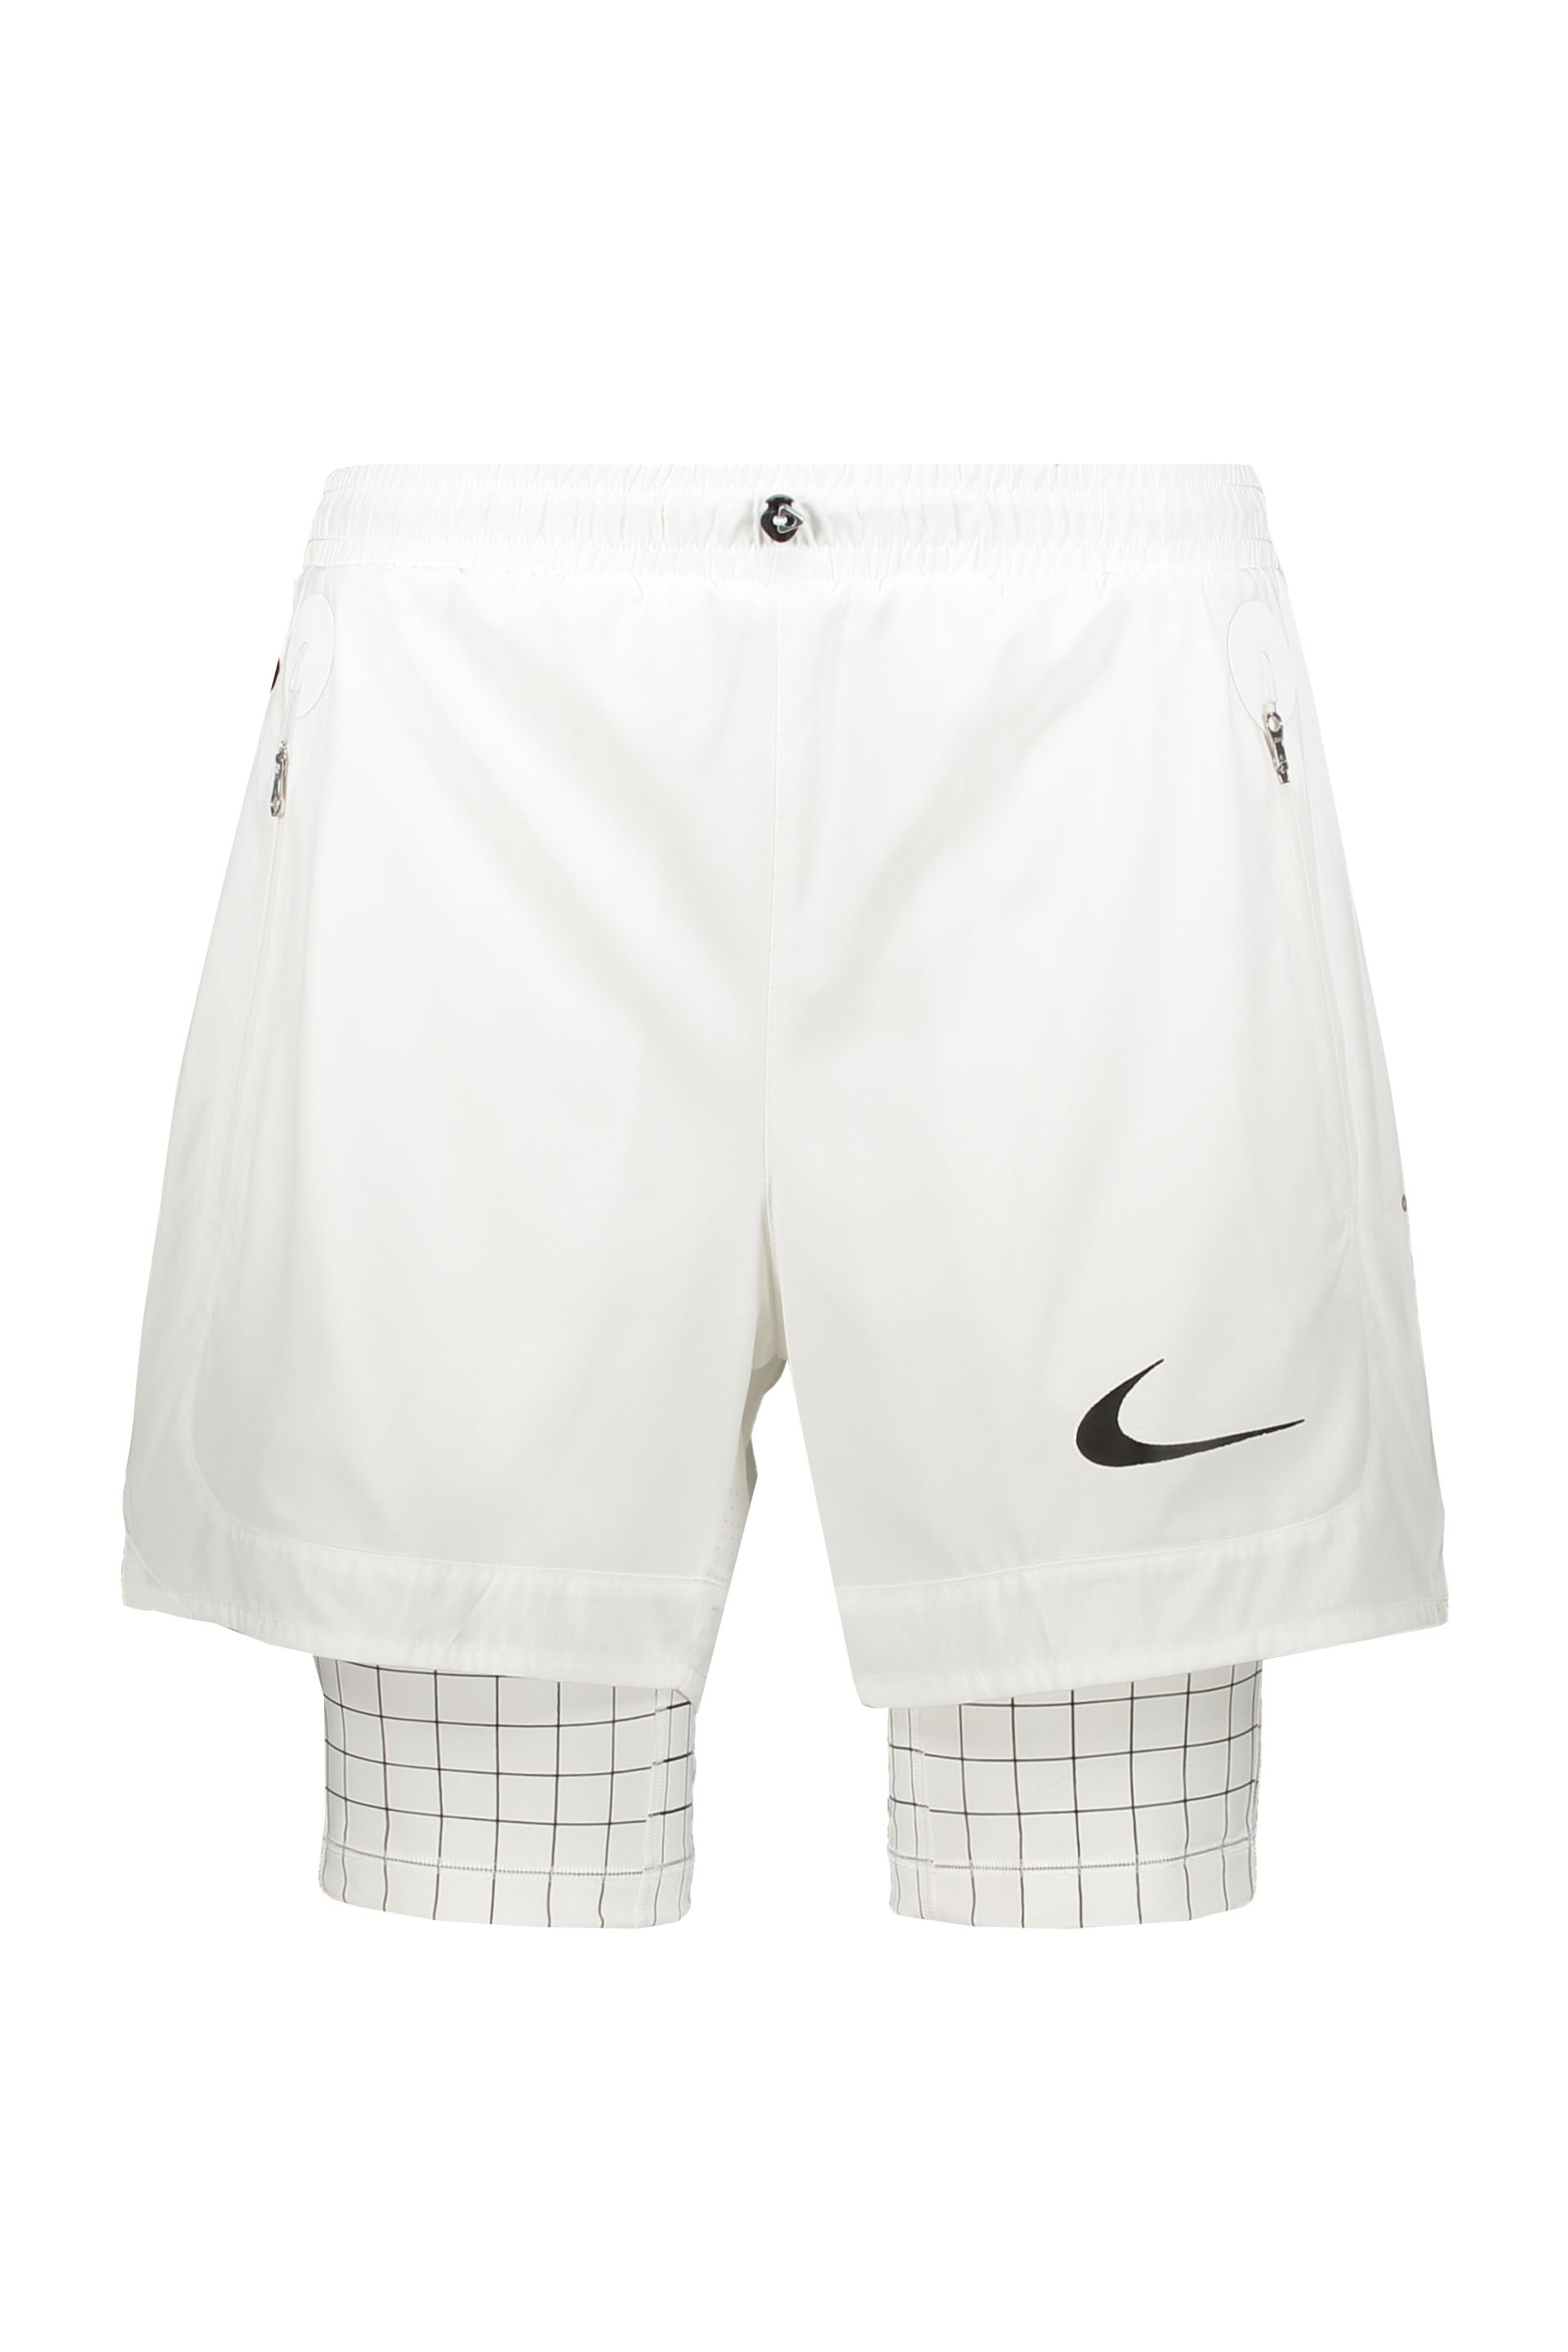 Off-White-OUTLET-SALE-Nike-x-Off-White-Nylon-bermuda-shorts-Hosen-L-ARCHIVE-COLLECTION.jpg